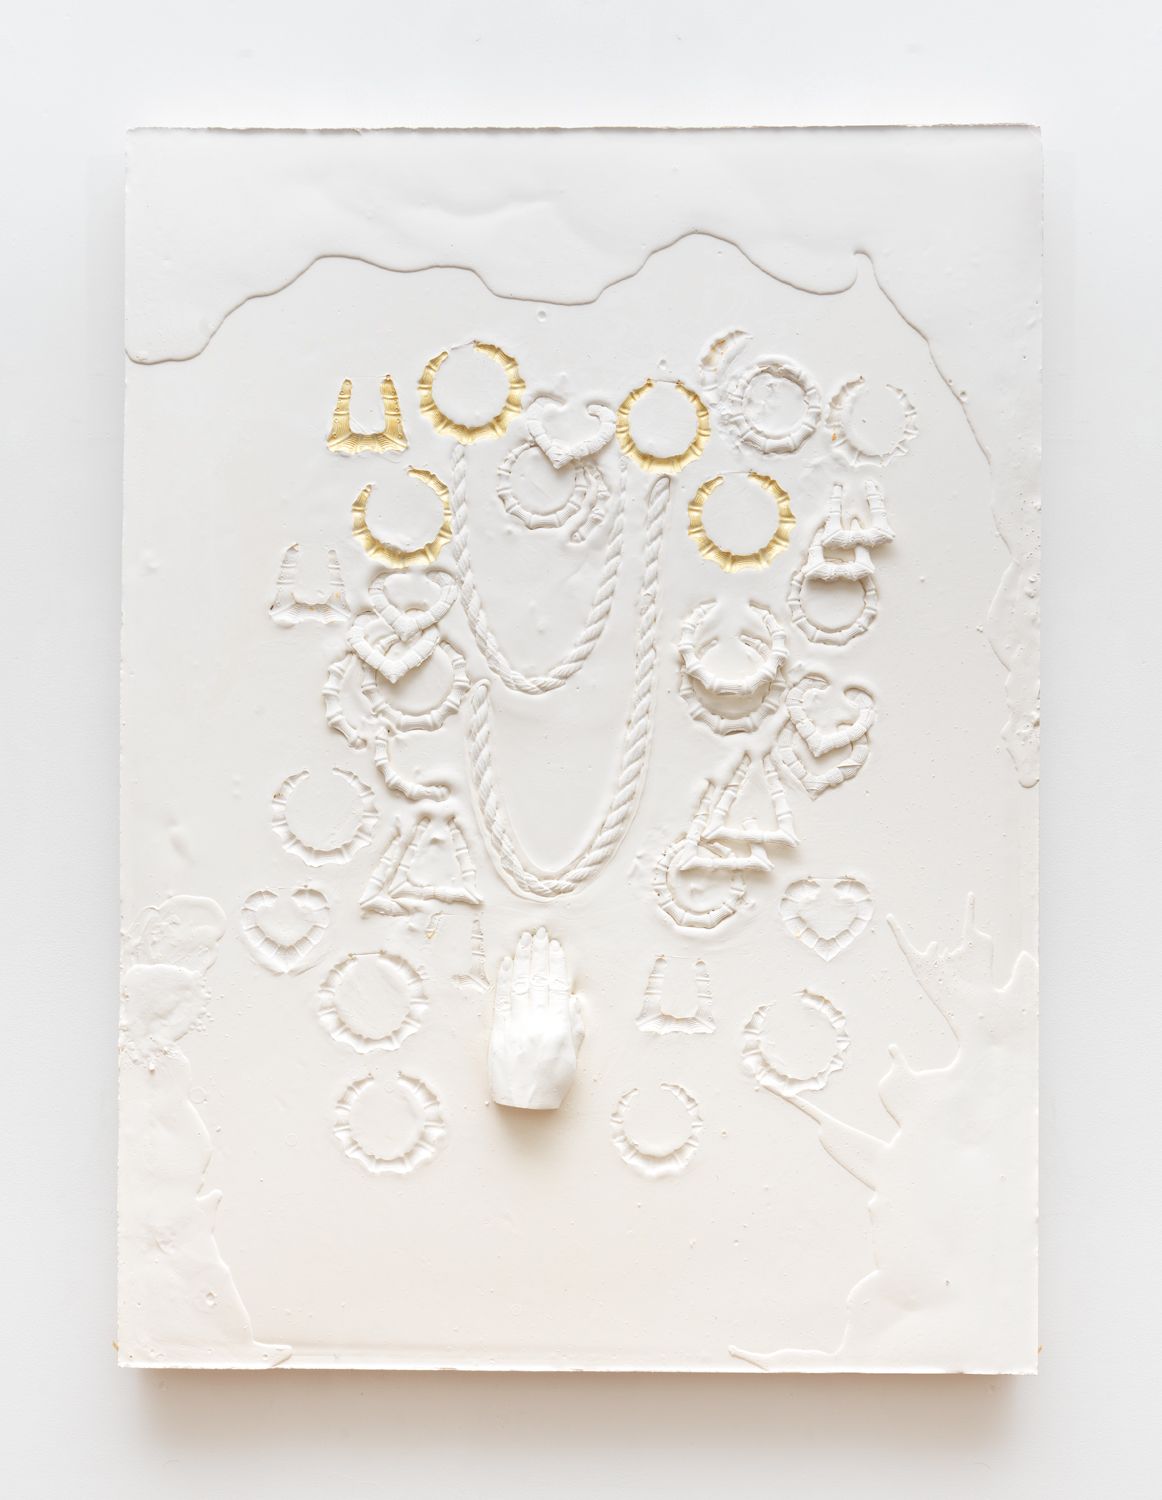 LaKela Brown, Composition with hand, chains, round earrings, heart earrings and bamboo earrings, 2019, plaster, foam, and acrylic, 46 x 34 x 3 in. (116.84 x 86.36 x 7.62 cm) 